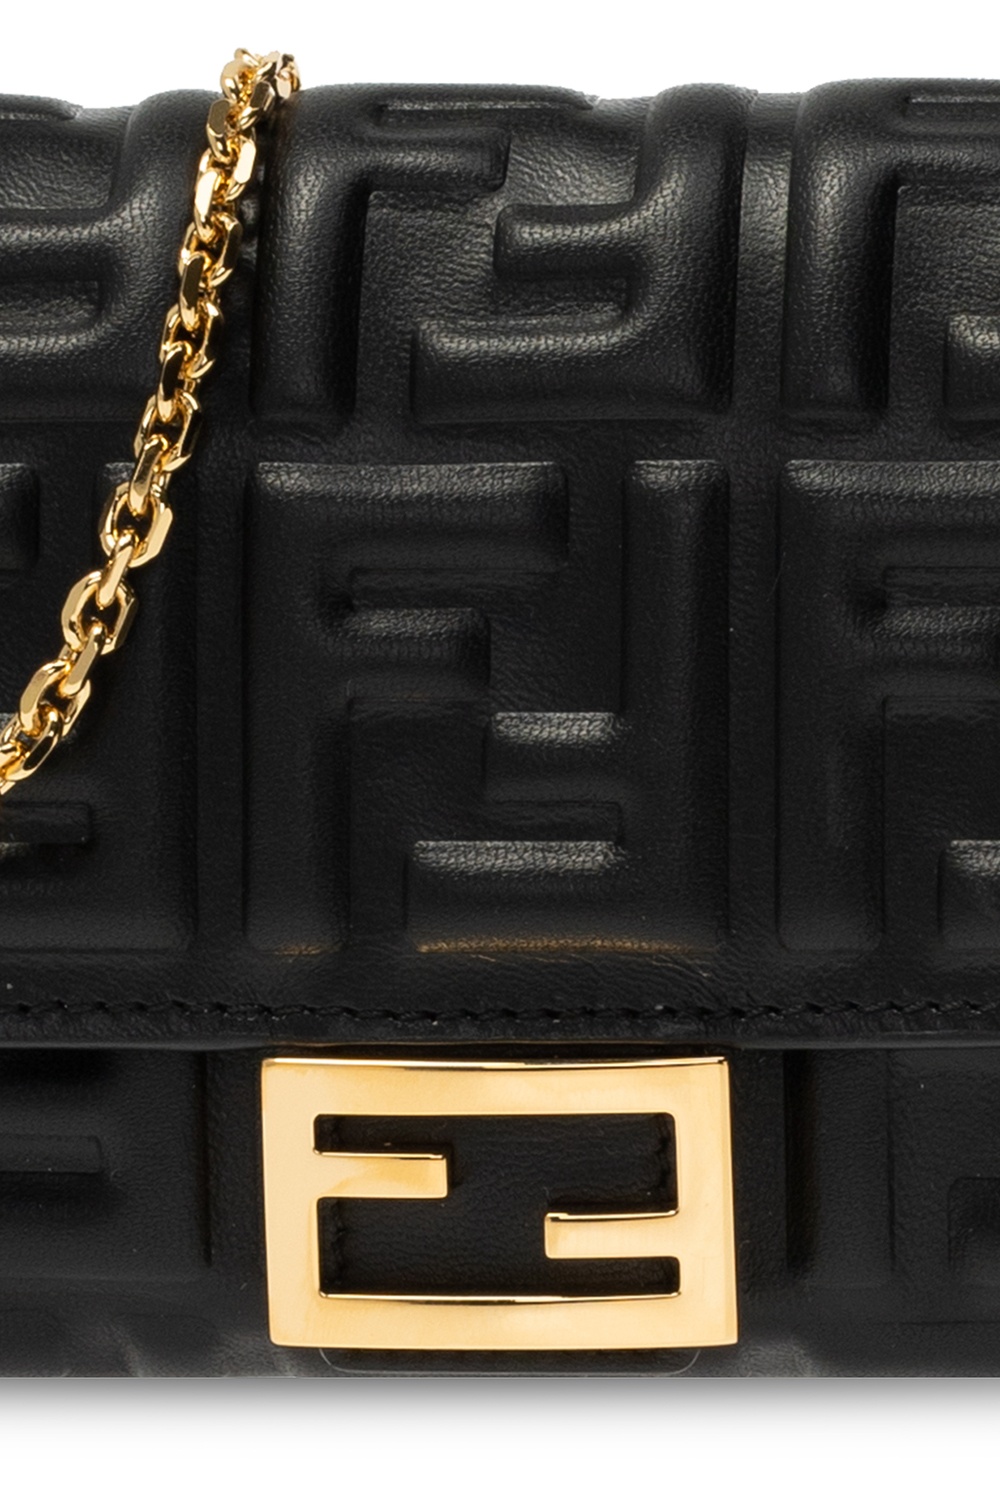 Fendi Dotcom Quilted Leather Chain Wallet in Black — UFO No More